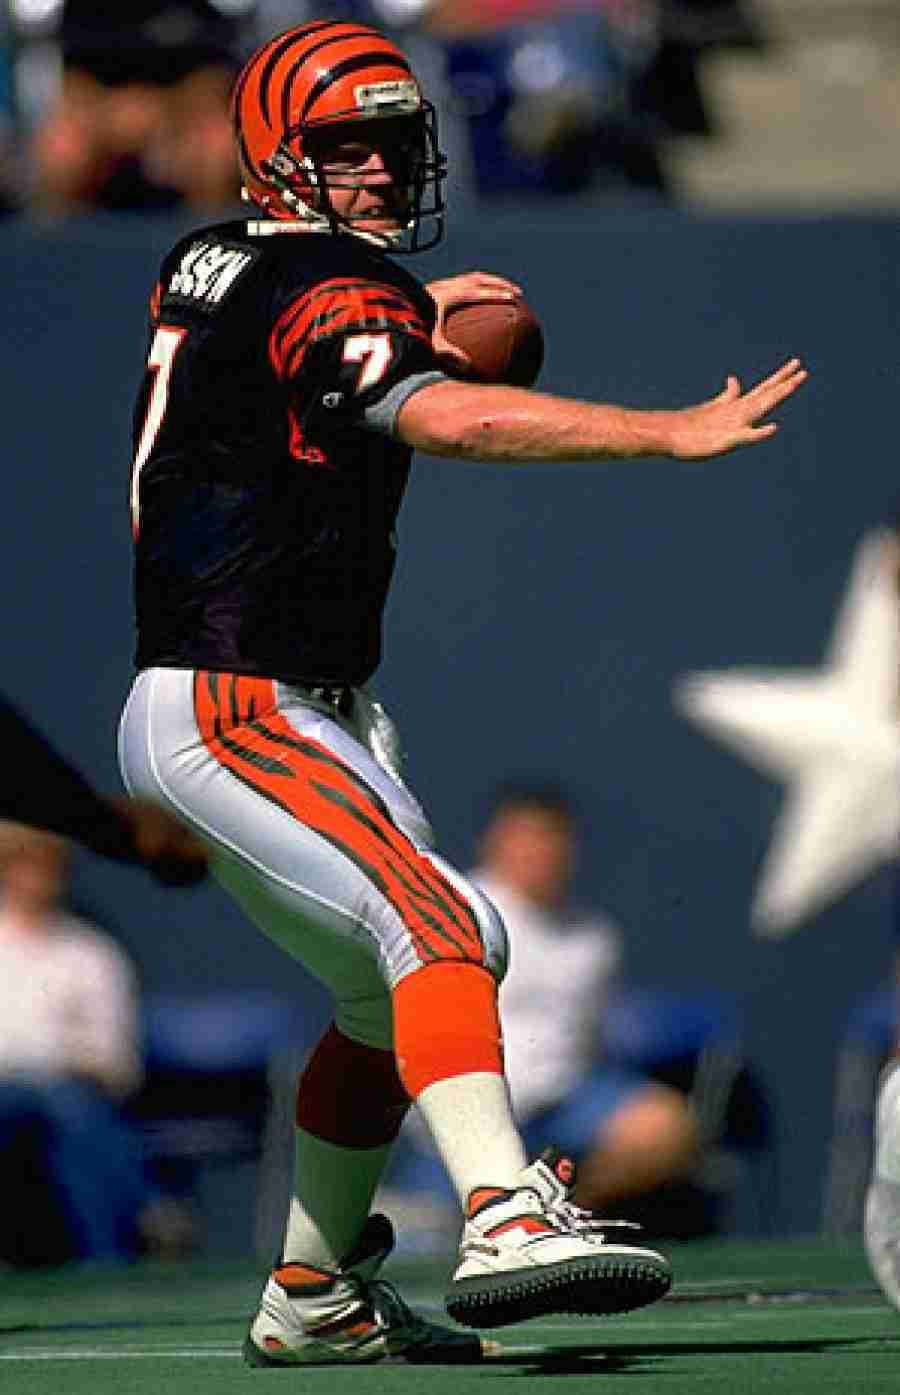 Not in Hall of Fame - 128. Boomer Esiason